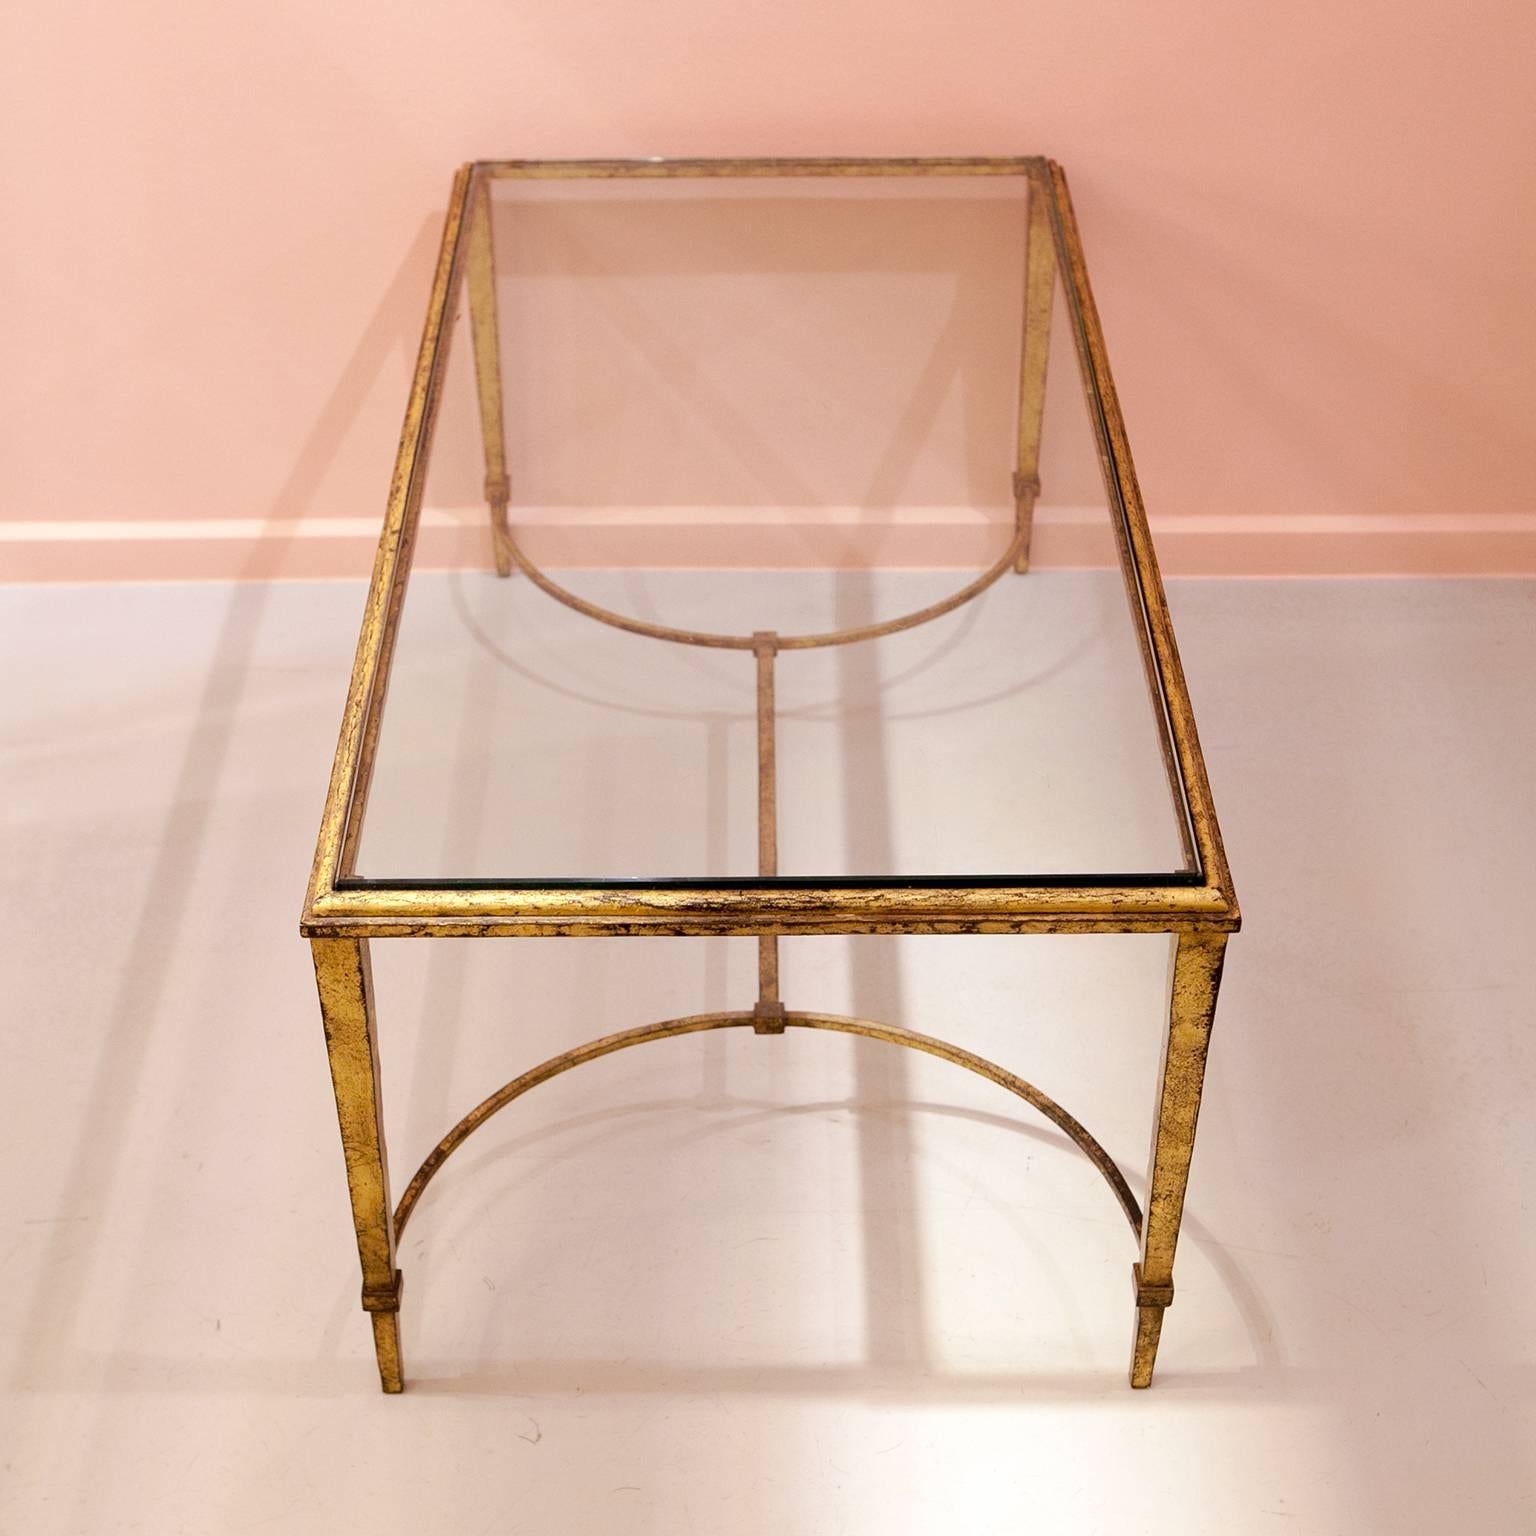 Mid-20th Century 1940s Mid-Century Modern French Coffee Table by Maison Ramsay, Glass, Gold For Sale